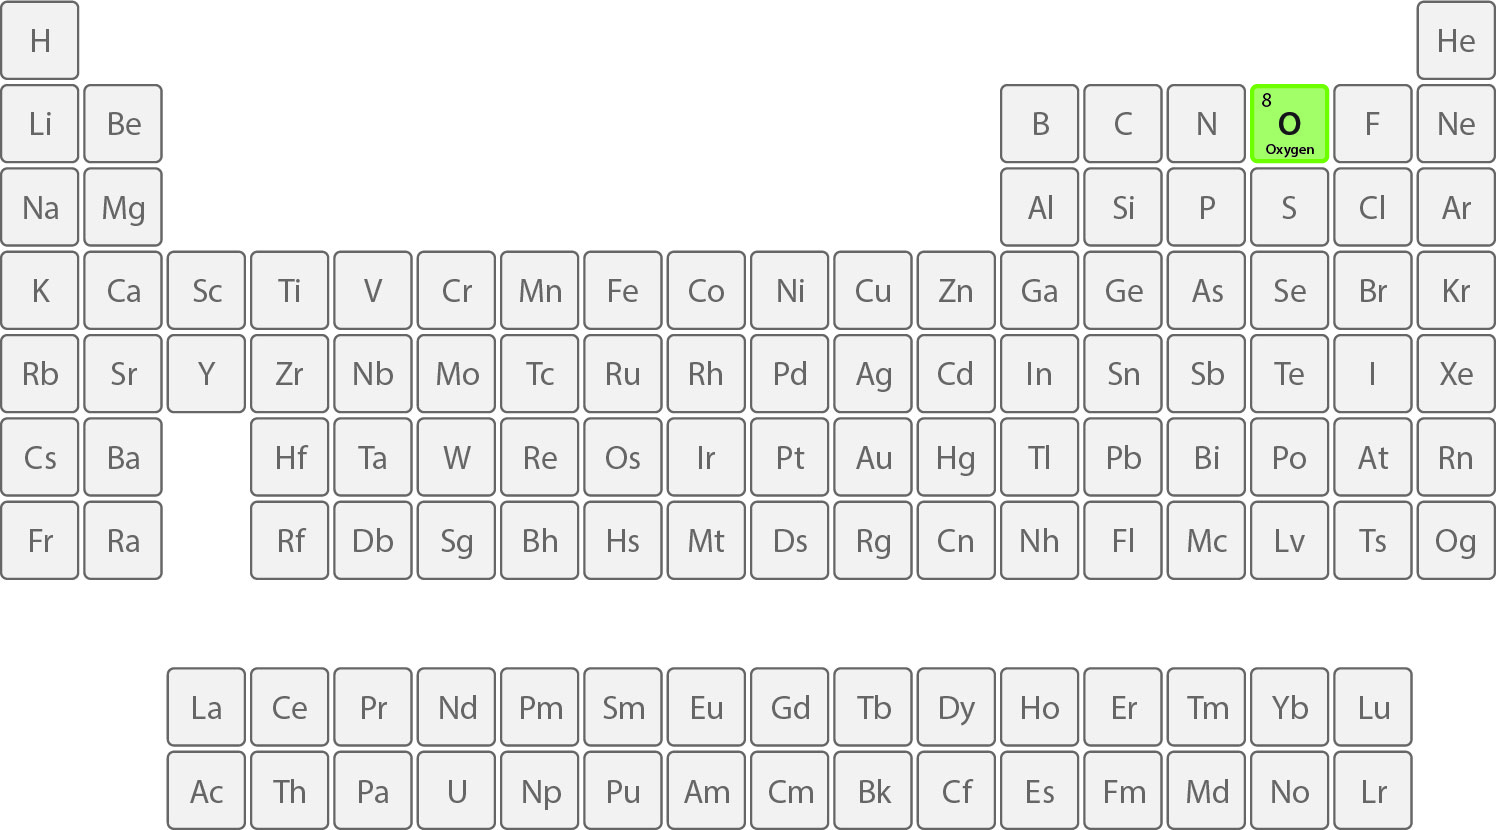 Oxygen on the periodic table